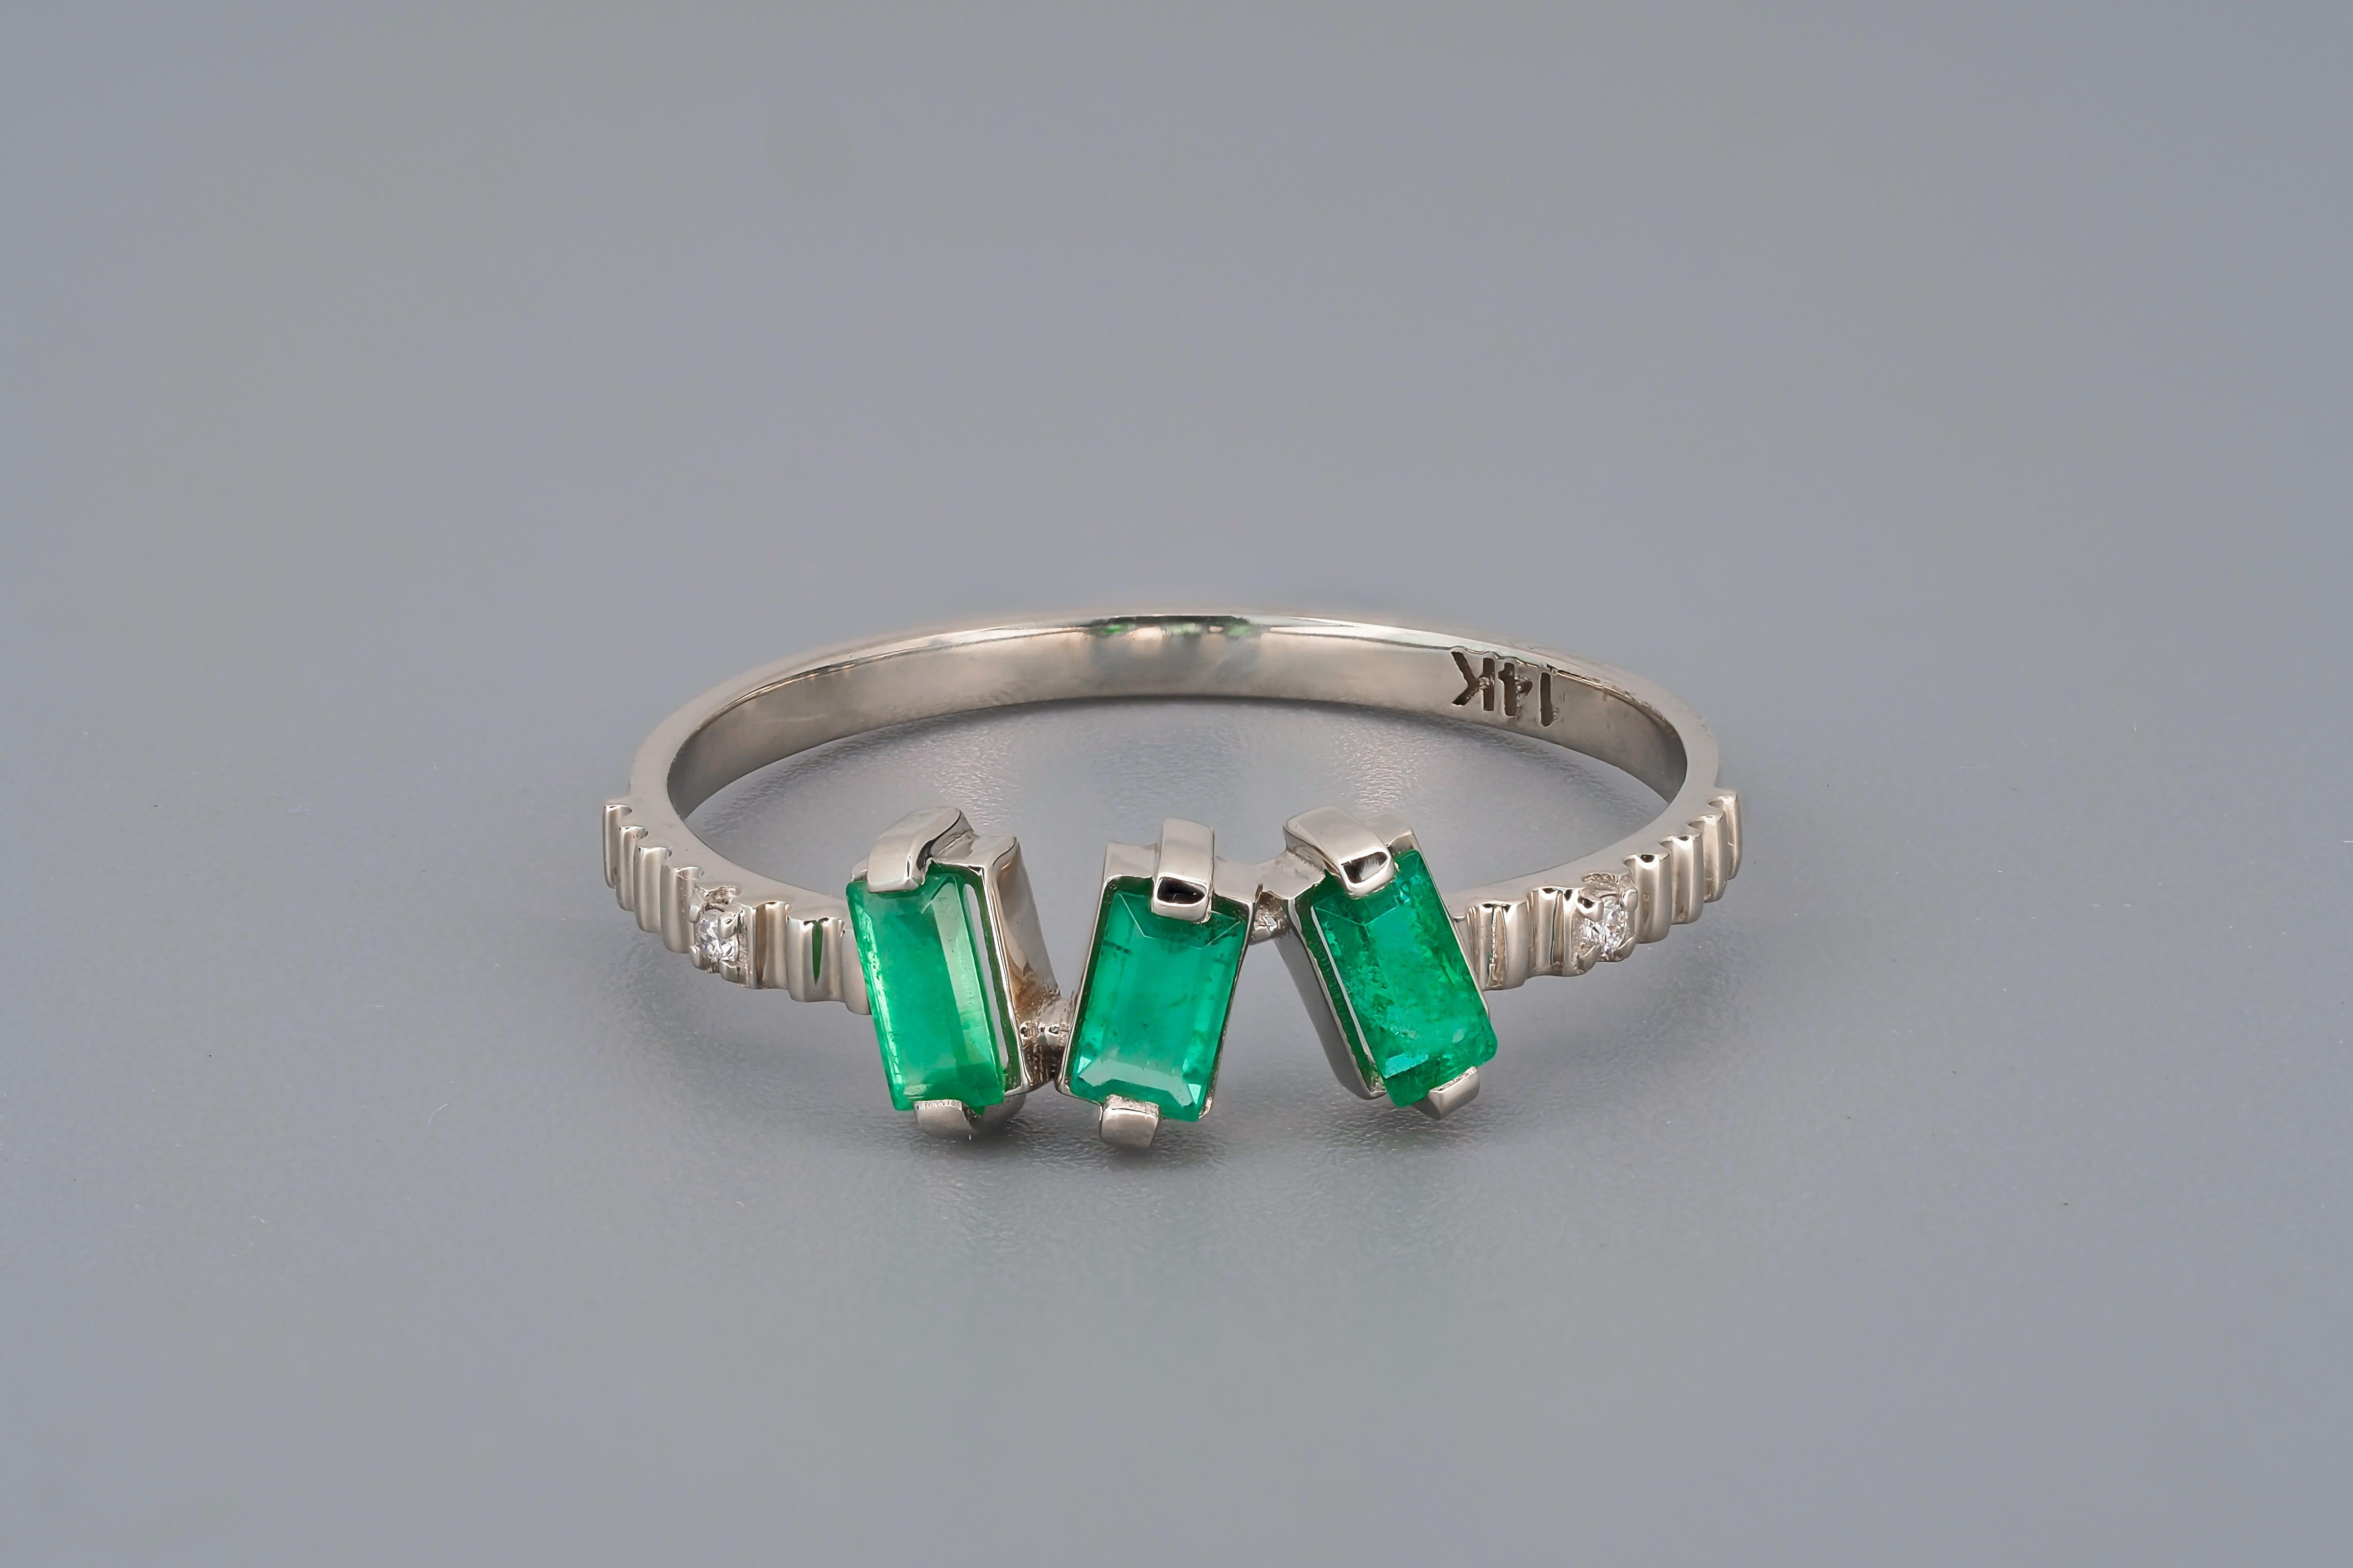 3 gemstone gold ring with emeralds. 
14k gold ring with Emeralds and diamonds. Baguette emerald ring. Emerald engagement ring. May birthstone ring.

Metal: 14k gold
Weight: 1.55 g. depends from size.

Central stone: Emeralds - 3 pieces
Cut: